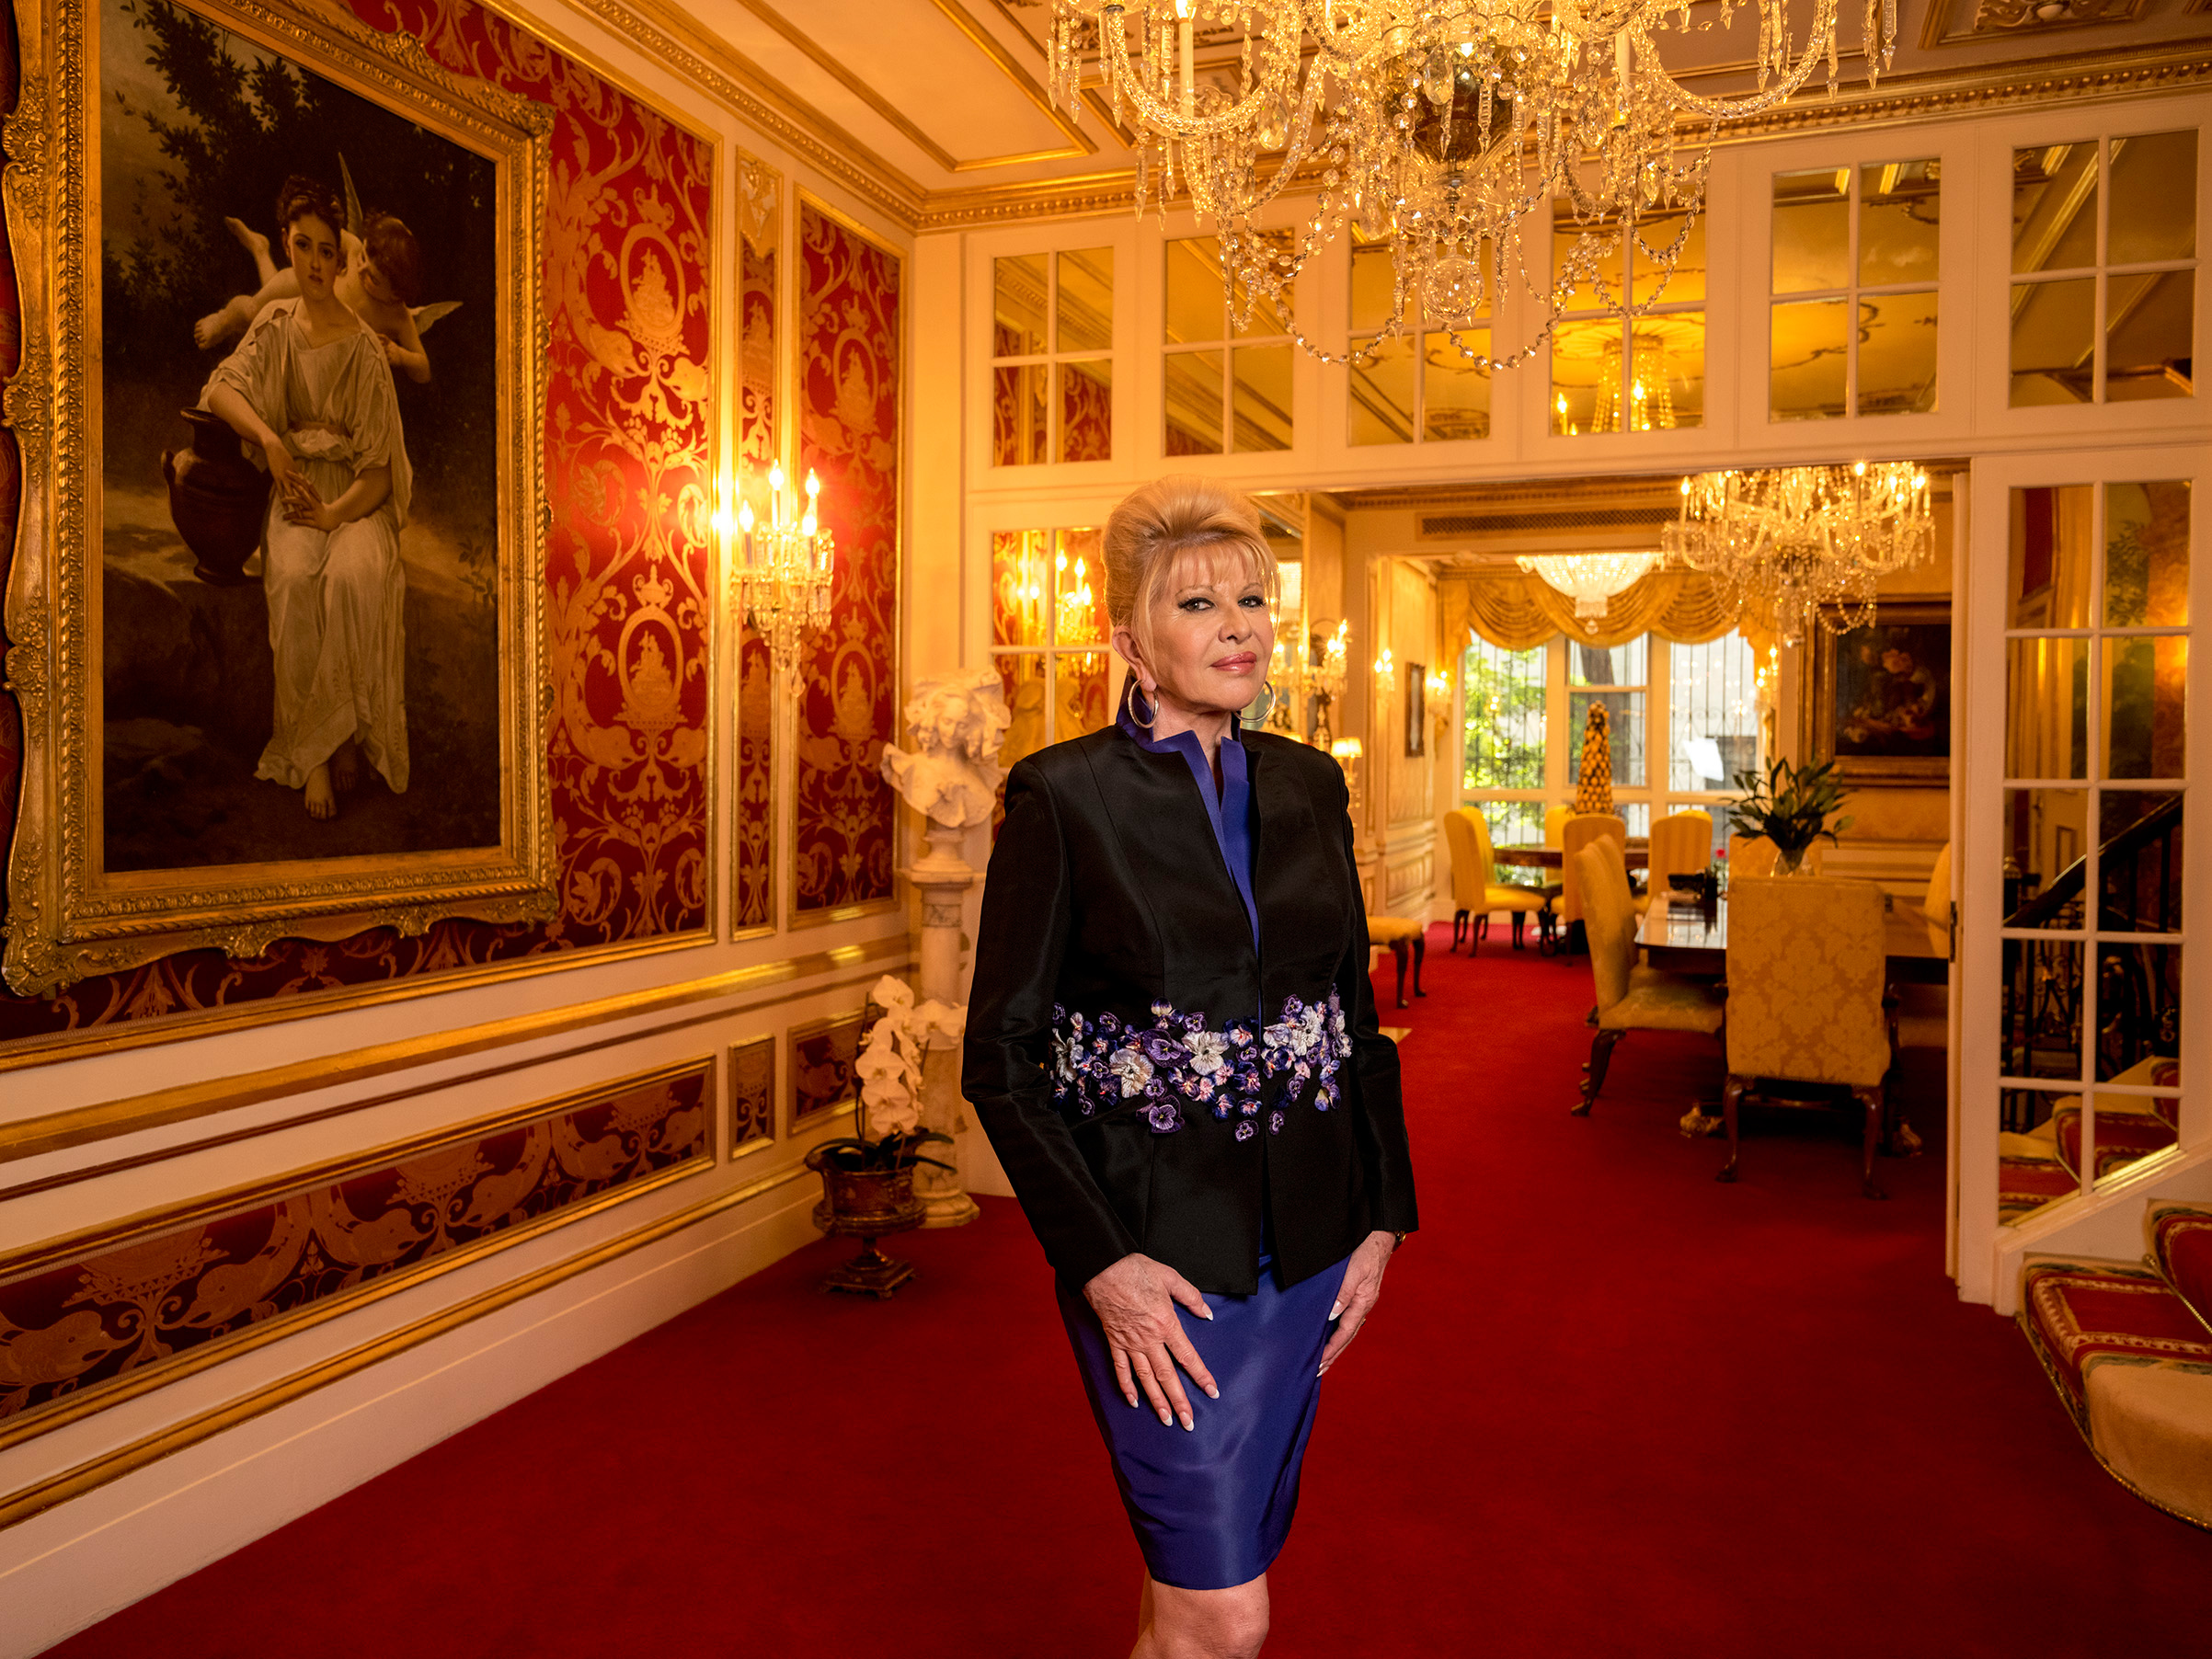 Ivana Trump at home in New York City on Oct. 6, 2017. (Gillian Laub for TIME)